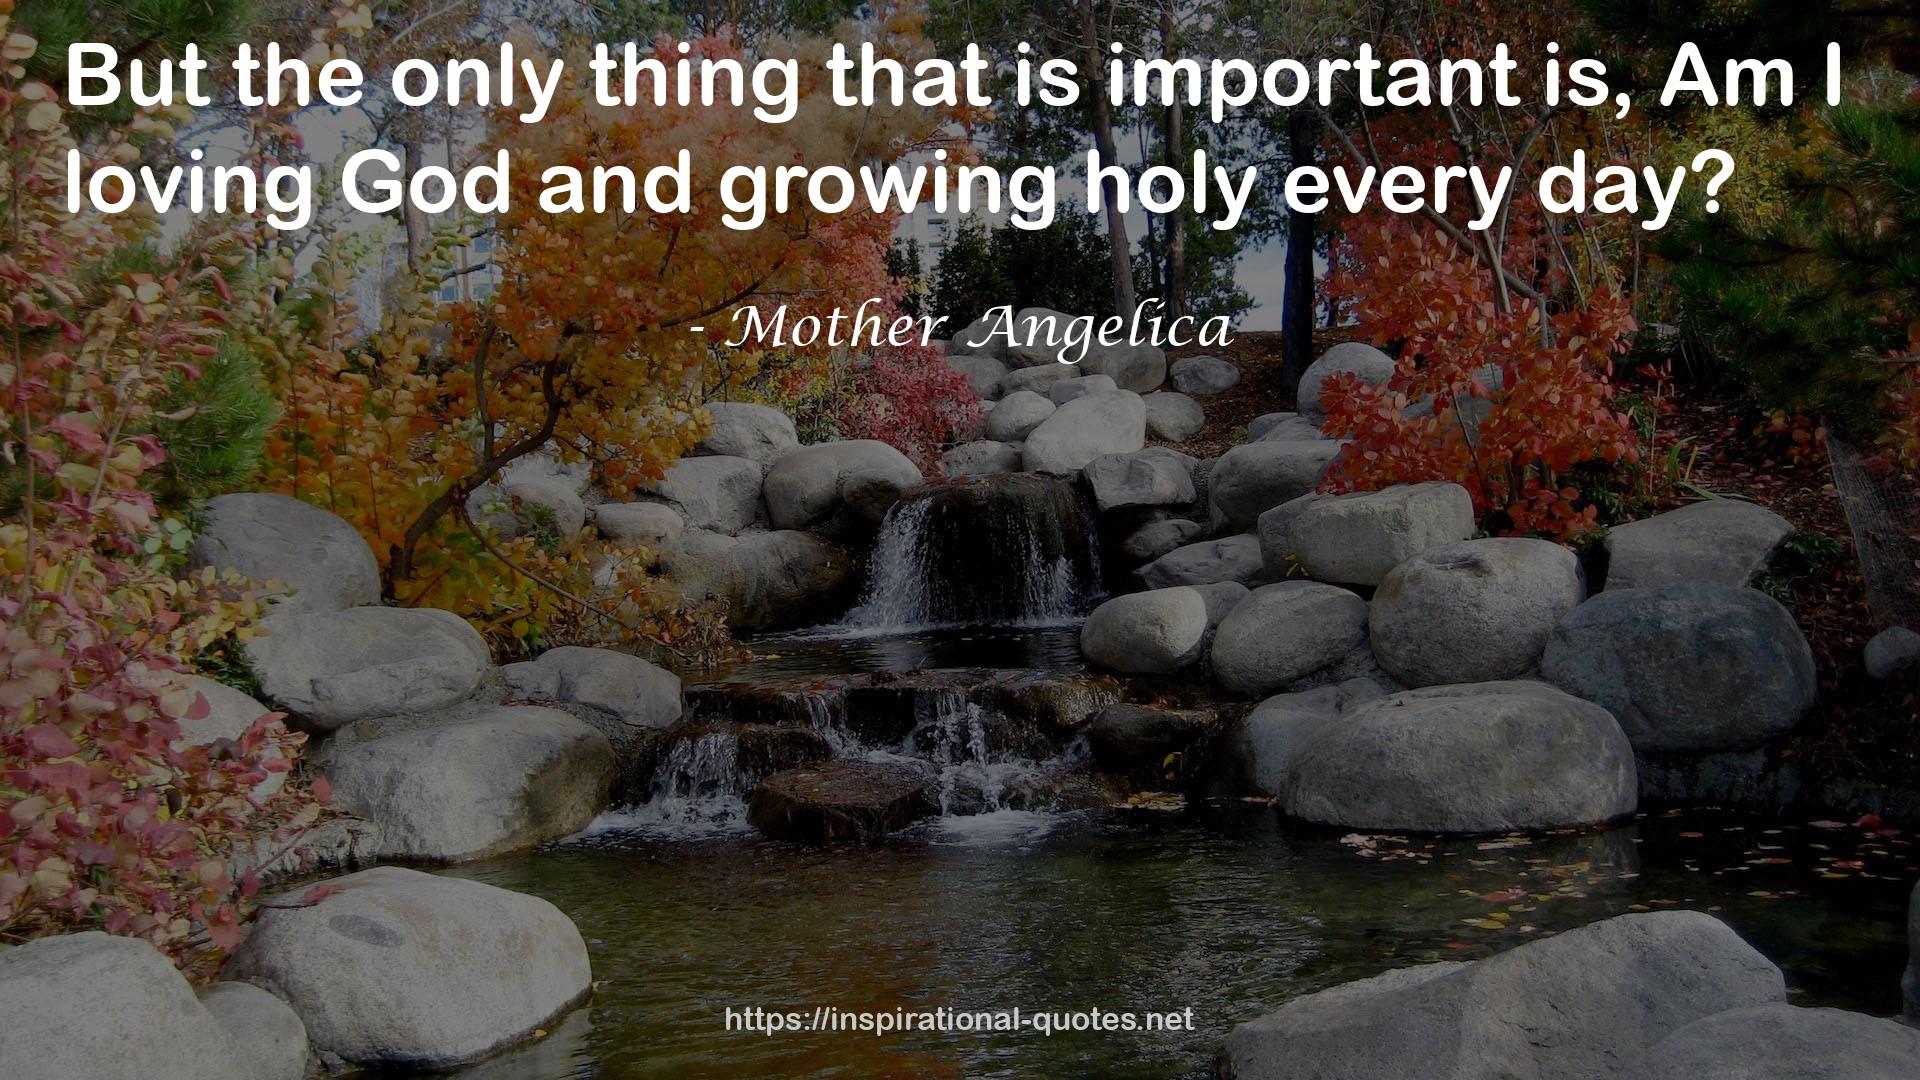 Mother Angelica QUOTES